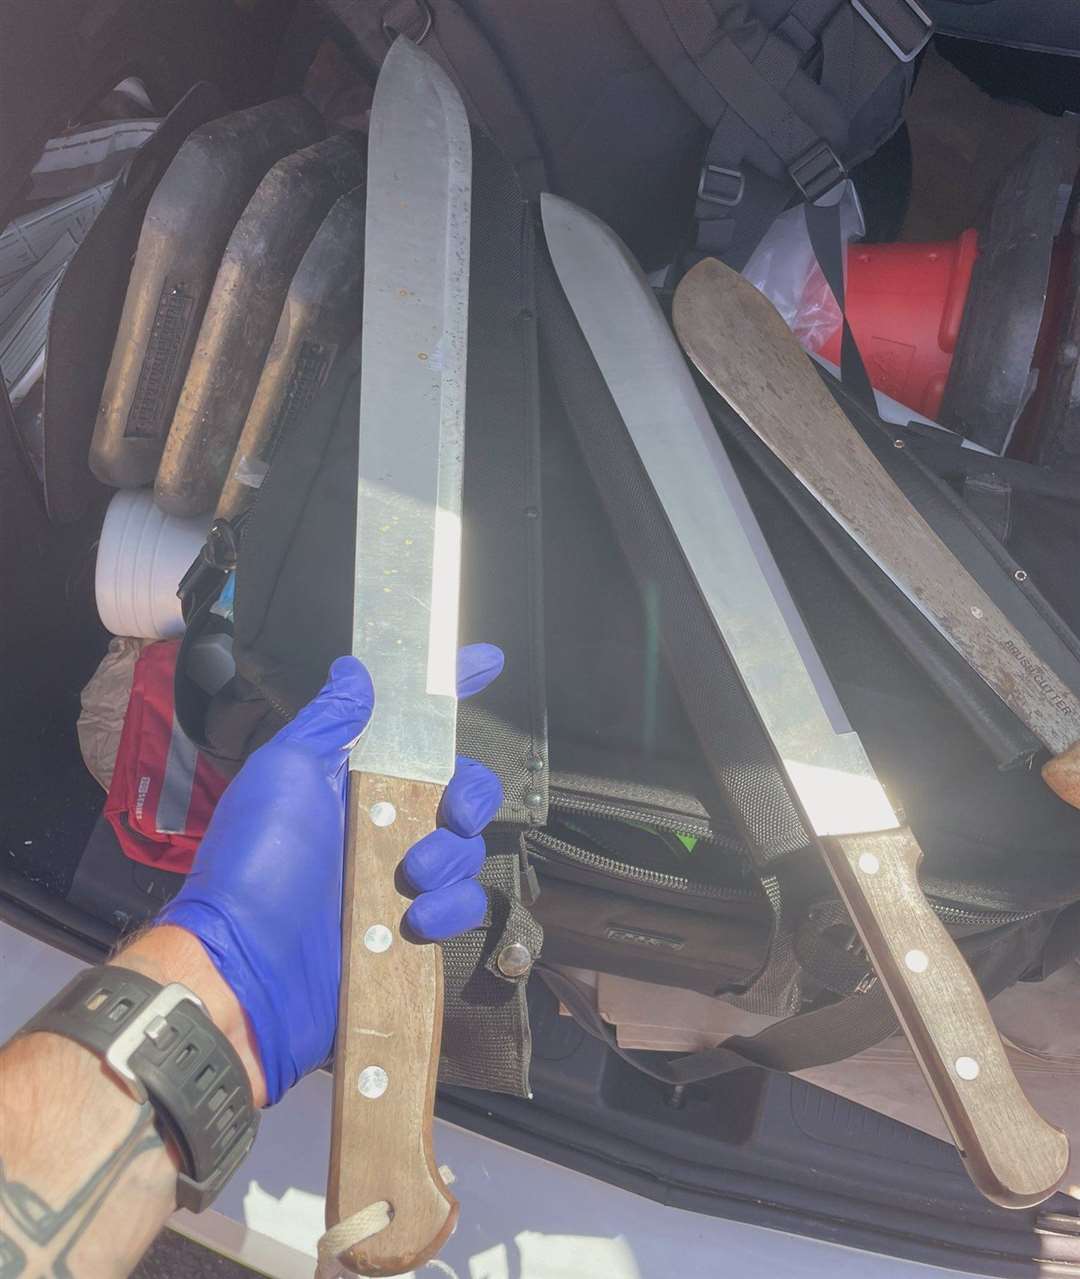 Police reportedly seized various weapons following a stop and search near Dartford yesterday. Photo: @KPTacOps